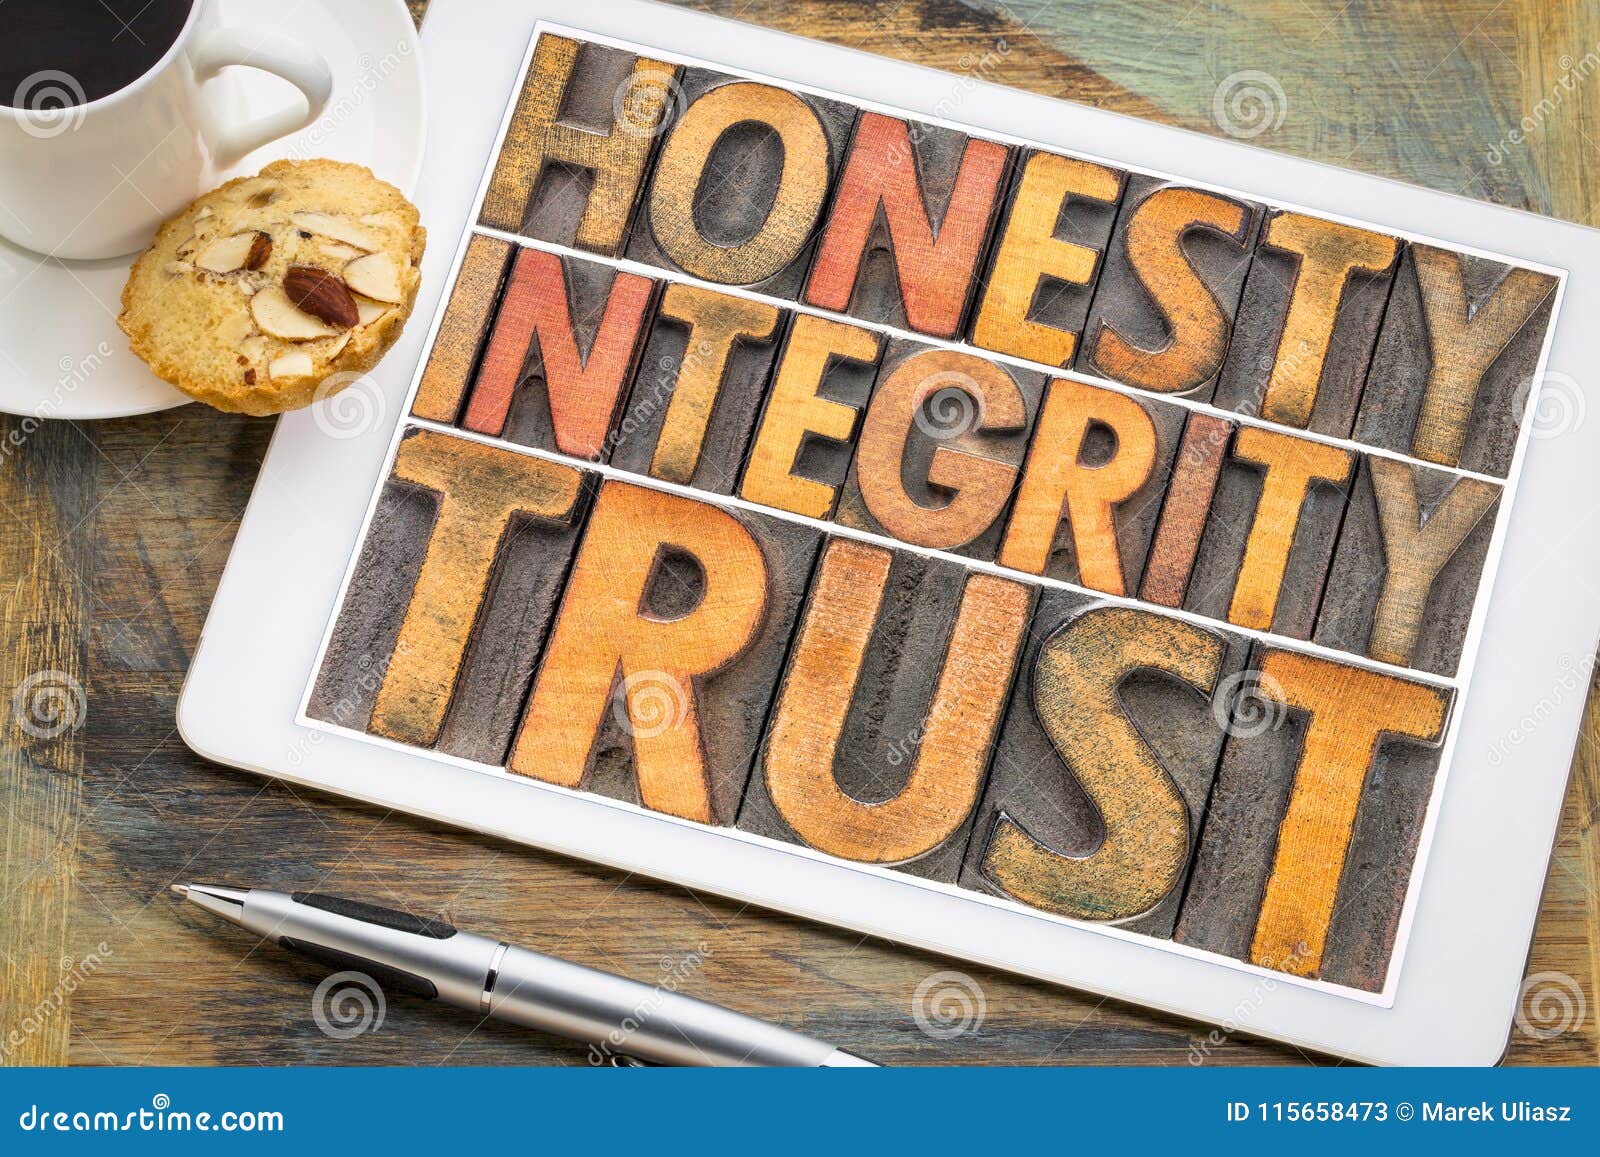 Honesty Integrity Trust Word Abstract In Wood Type Stock Image